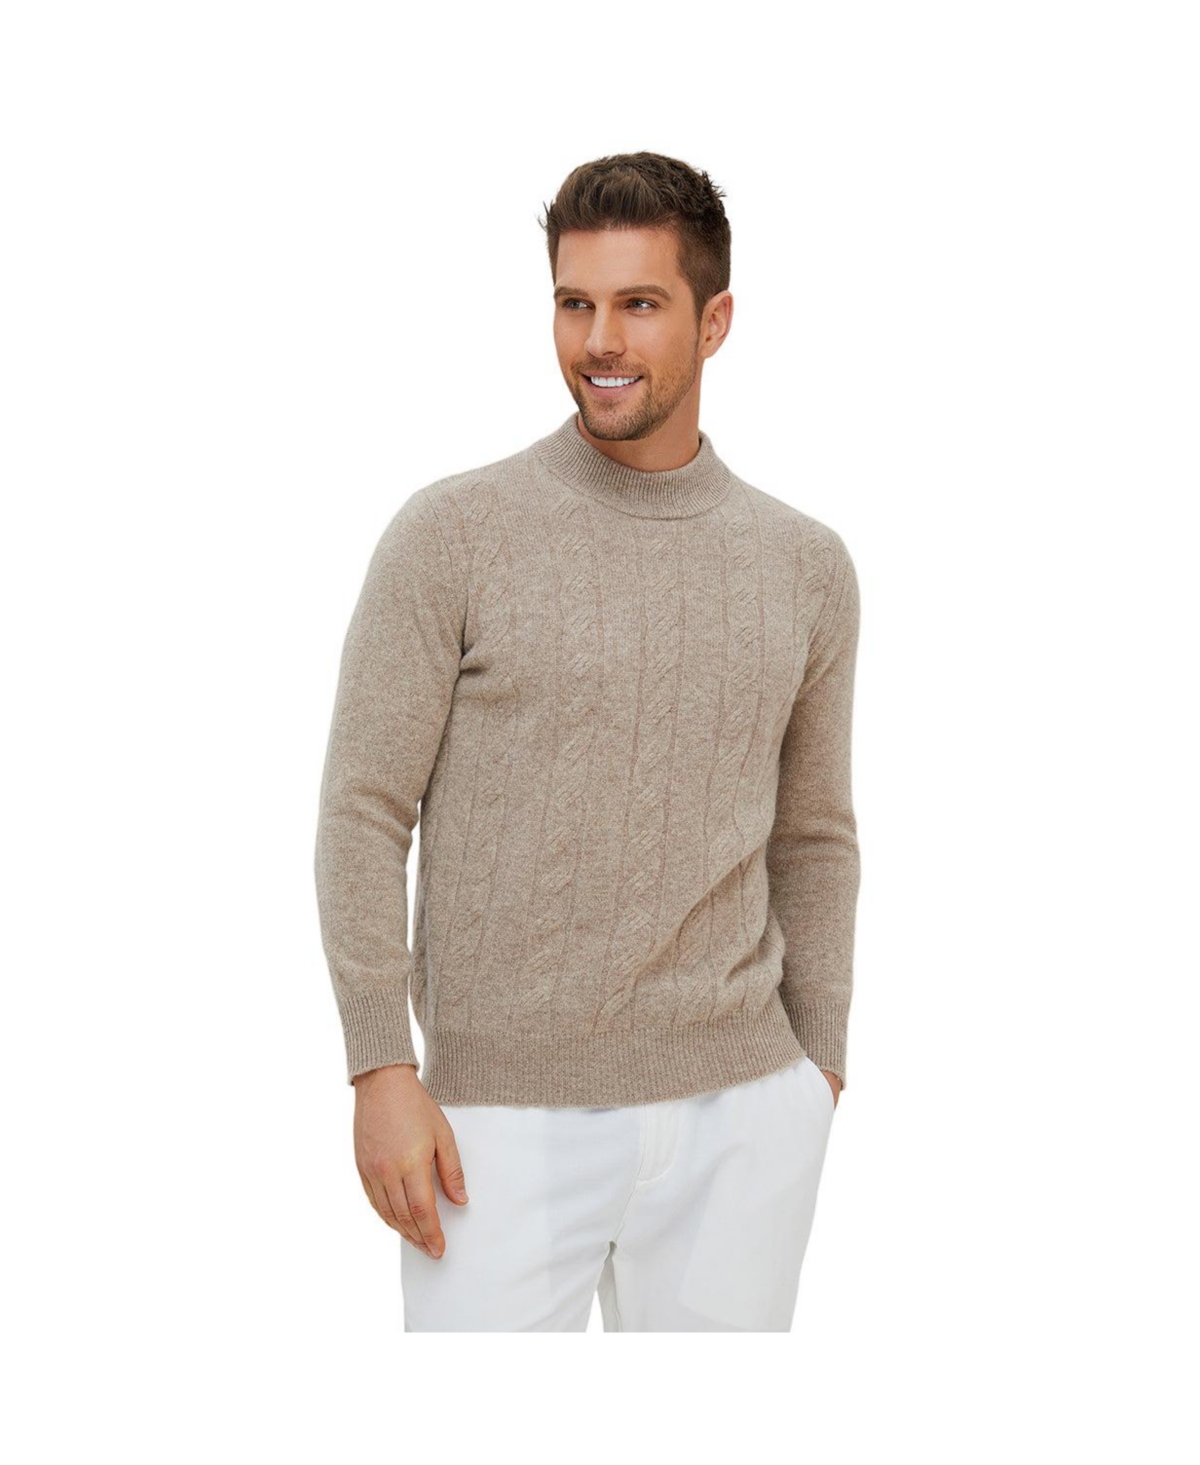 Bellemere Men's Rich Cable-Knit Merino Sweater - Camel